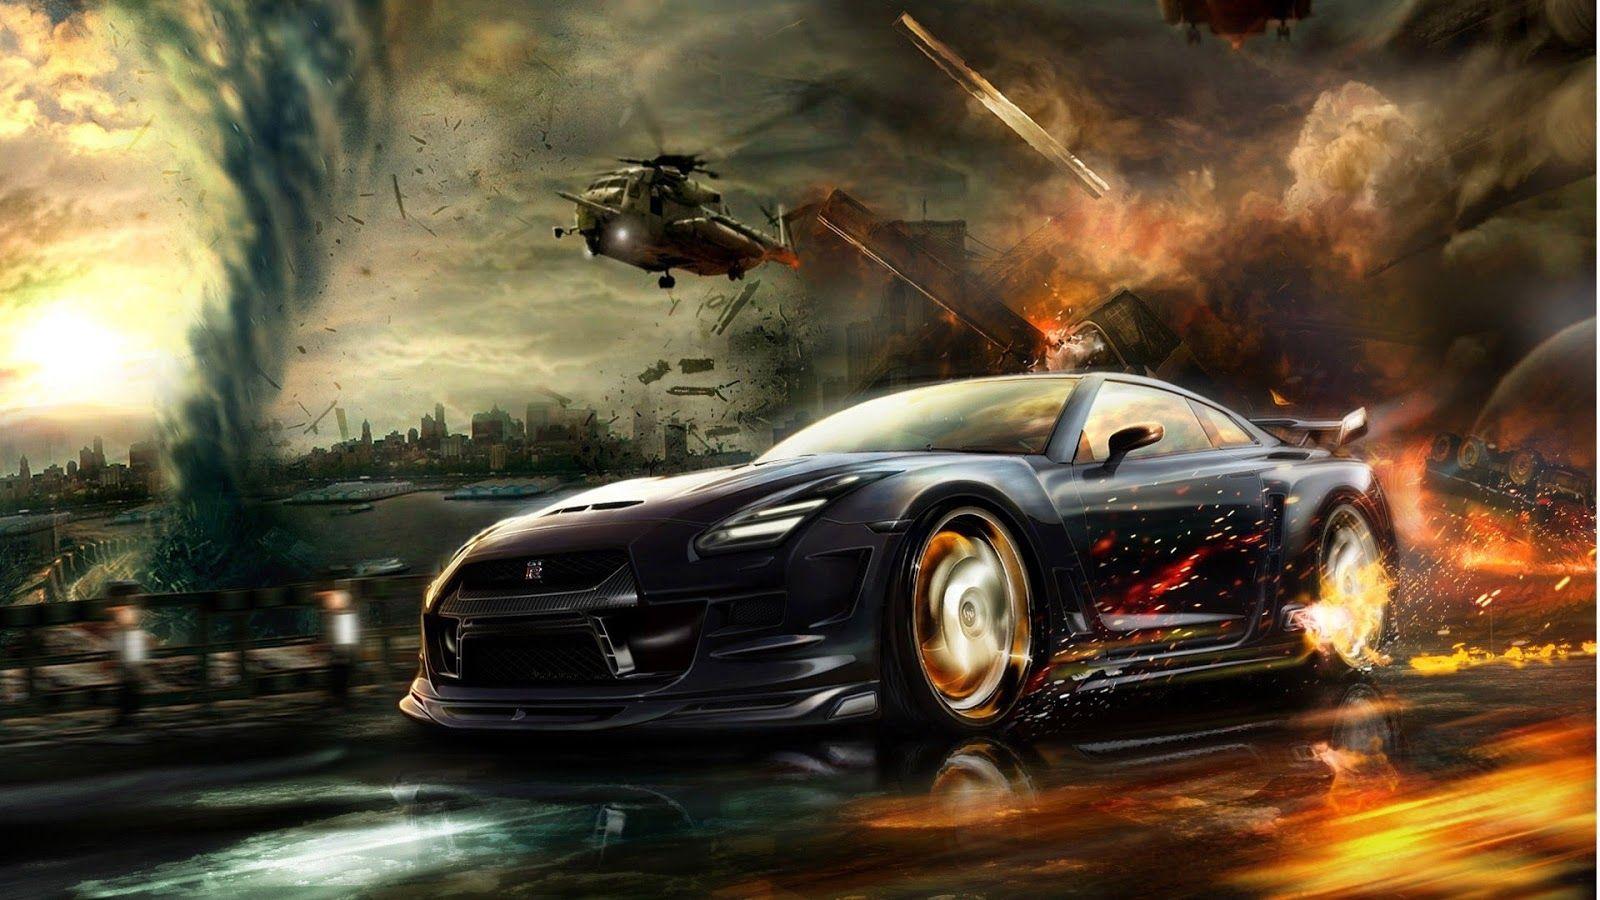 Free Cool Car Wallpaper For Phone High Quality Desktop Ol A Gallery